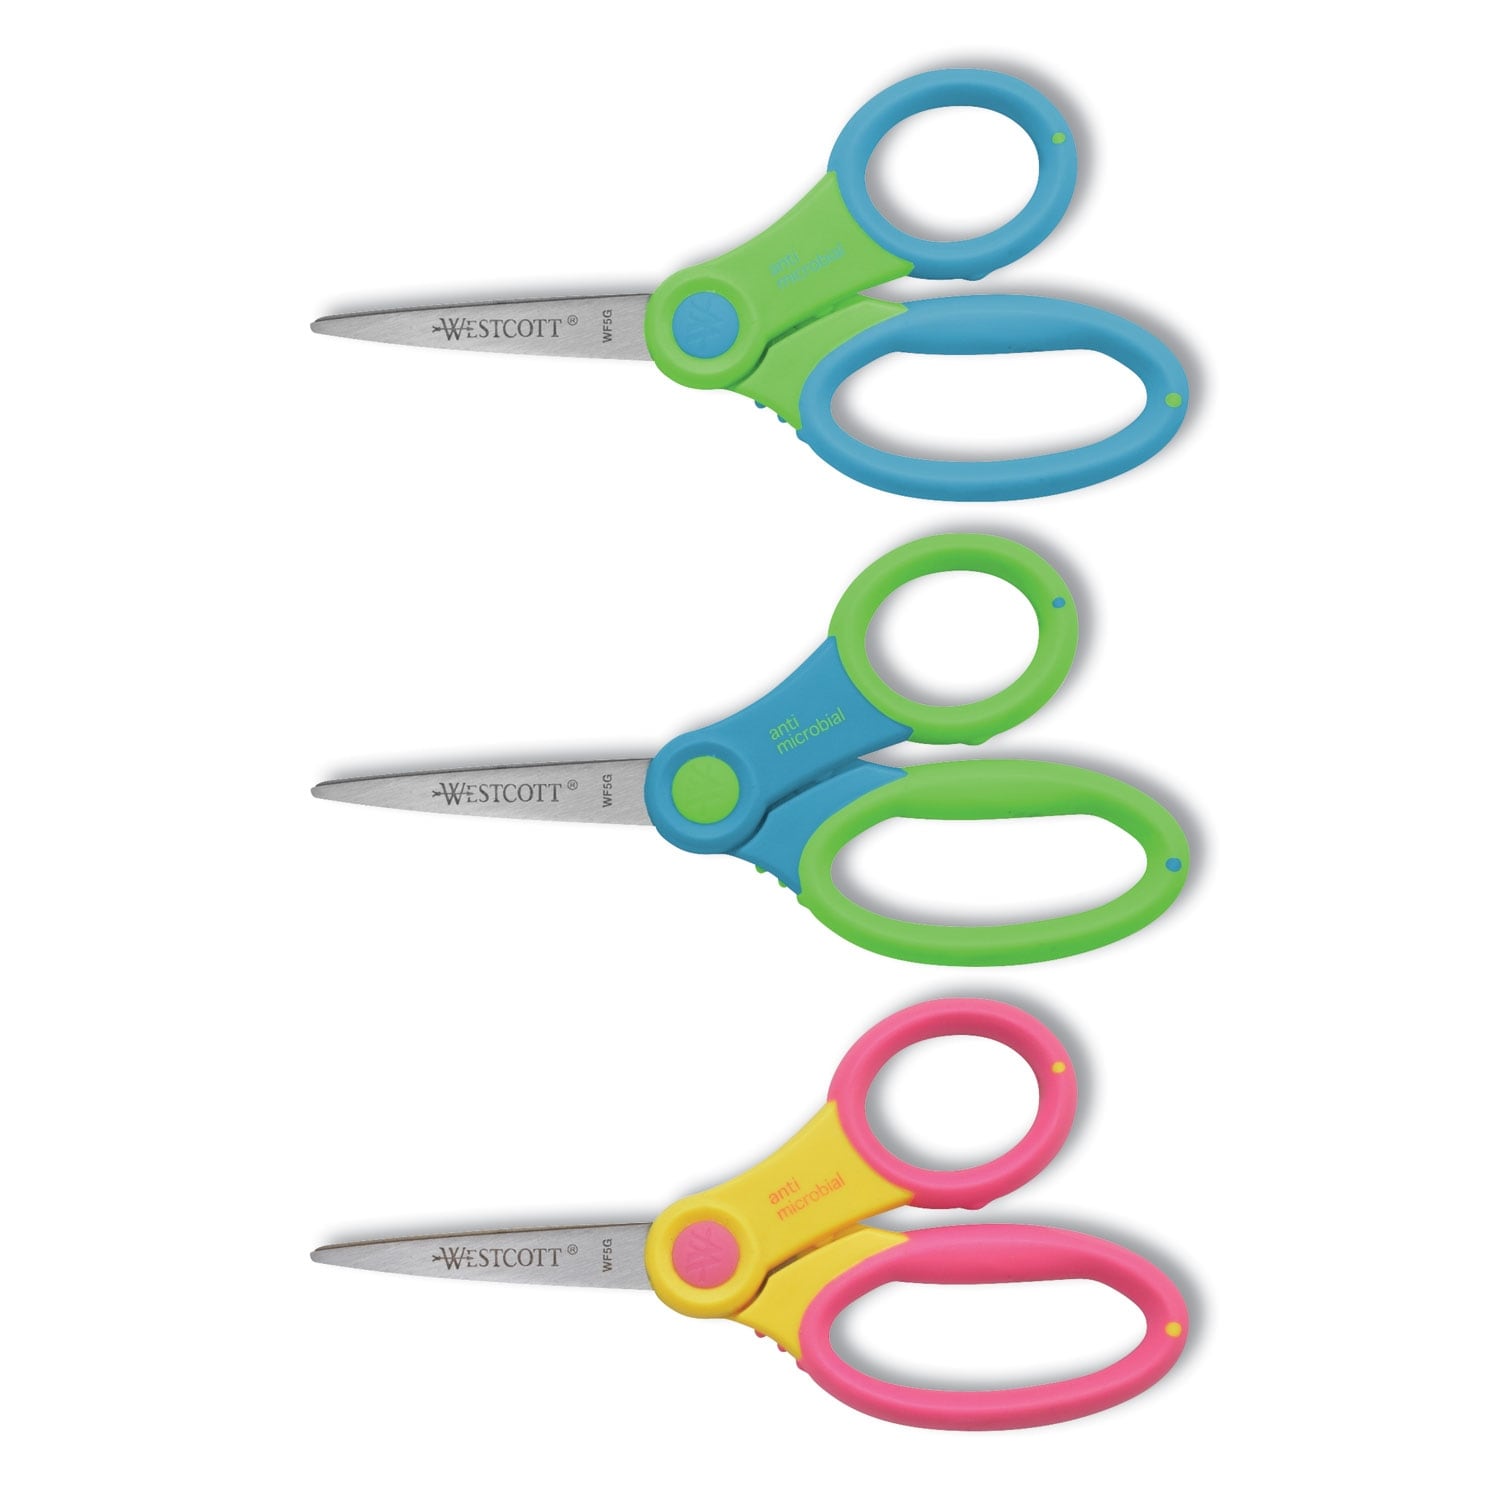 Ultra Soft Handle Scissors w/Antimicrobial Protect...